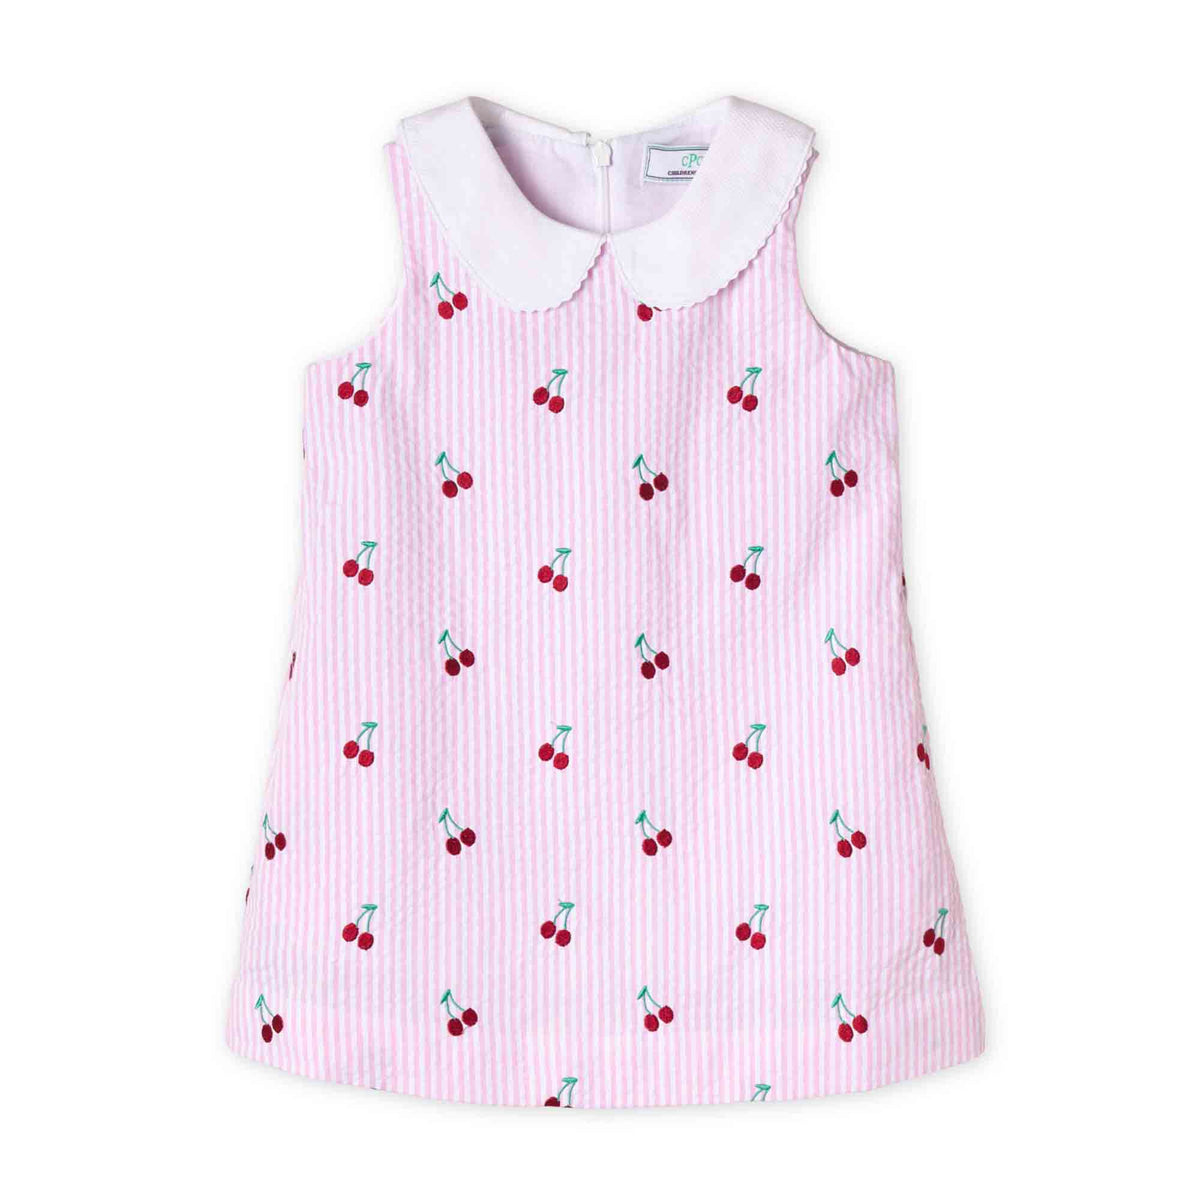 Classic and Preppy Maddie Dress, Pink Stripe Cherries Embroidery-Dresses, Jumpsuits and Rompers-Cherries on Pink Stripe-6-9M-CPC - Classic Prep Childrenswear